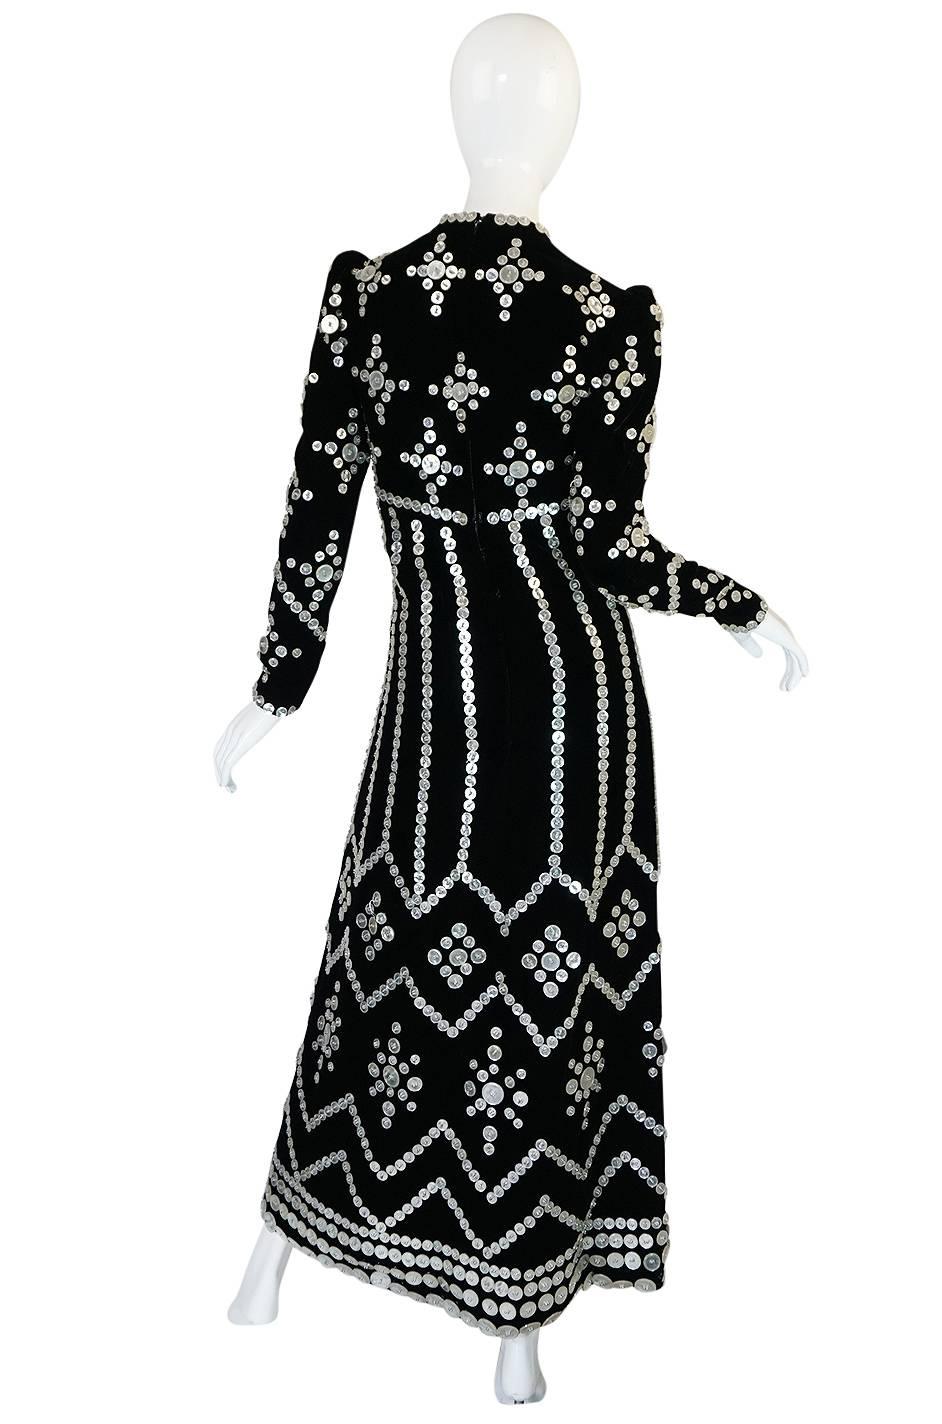 This is a remarkable and extraordinary dress that is really a testament to the one-of-a-kind-treasures that one can only find with vintage. I absolutely adore this futuristic maxi dress that is really a work of wearable art. The combination of cut,